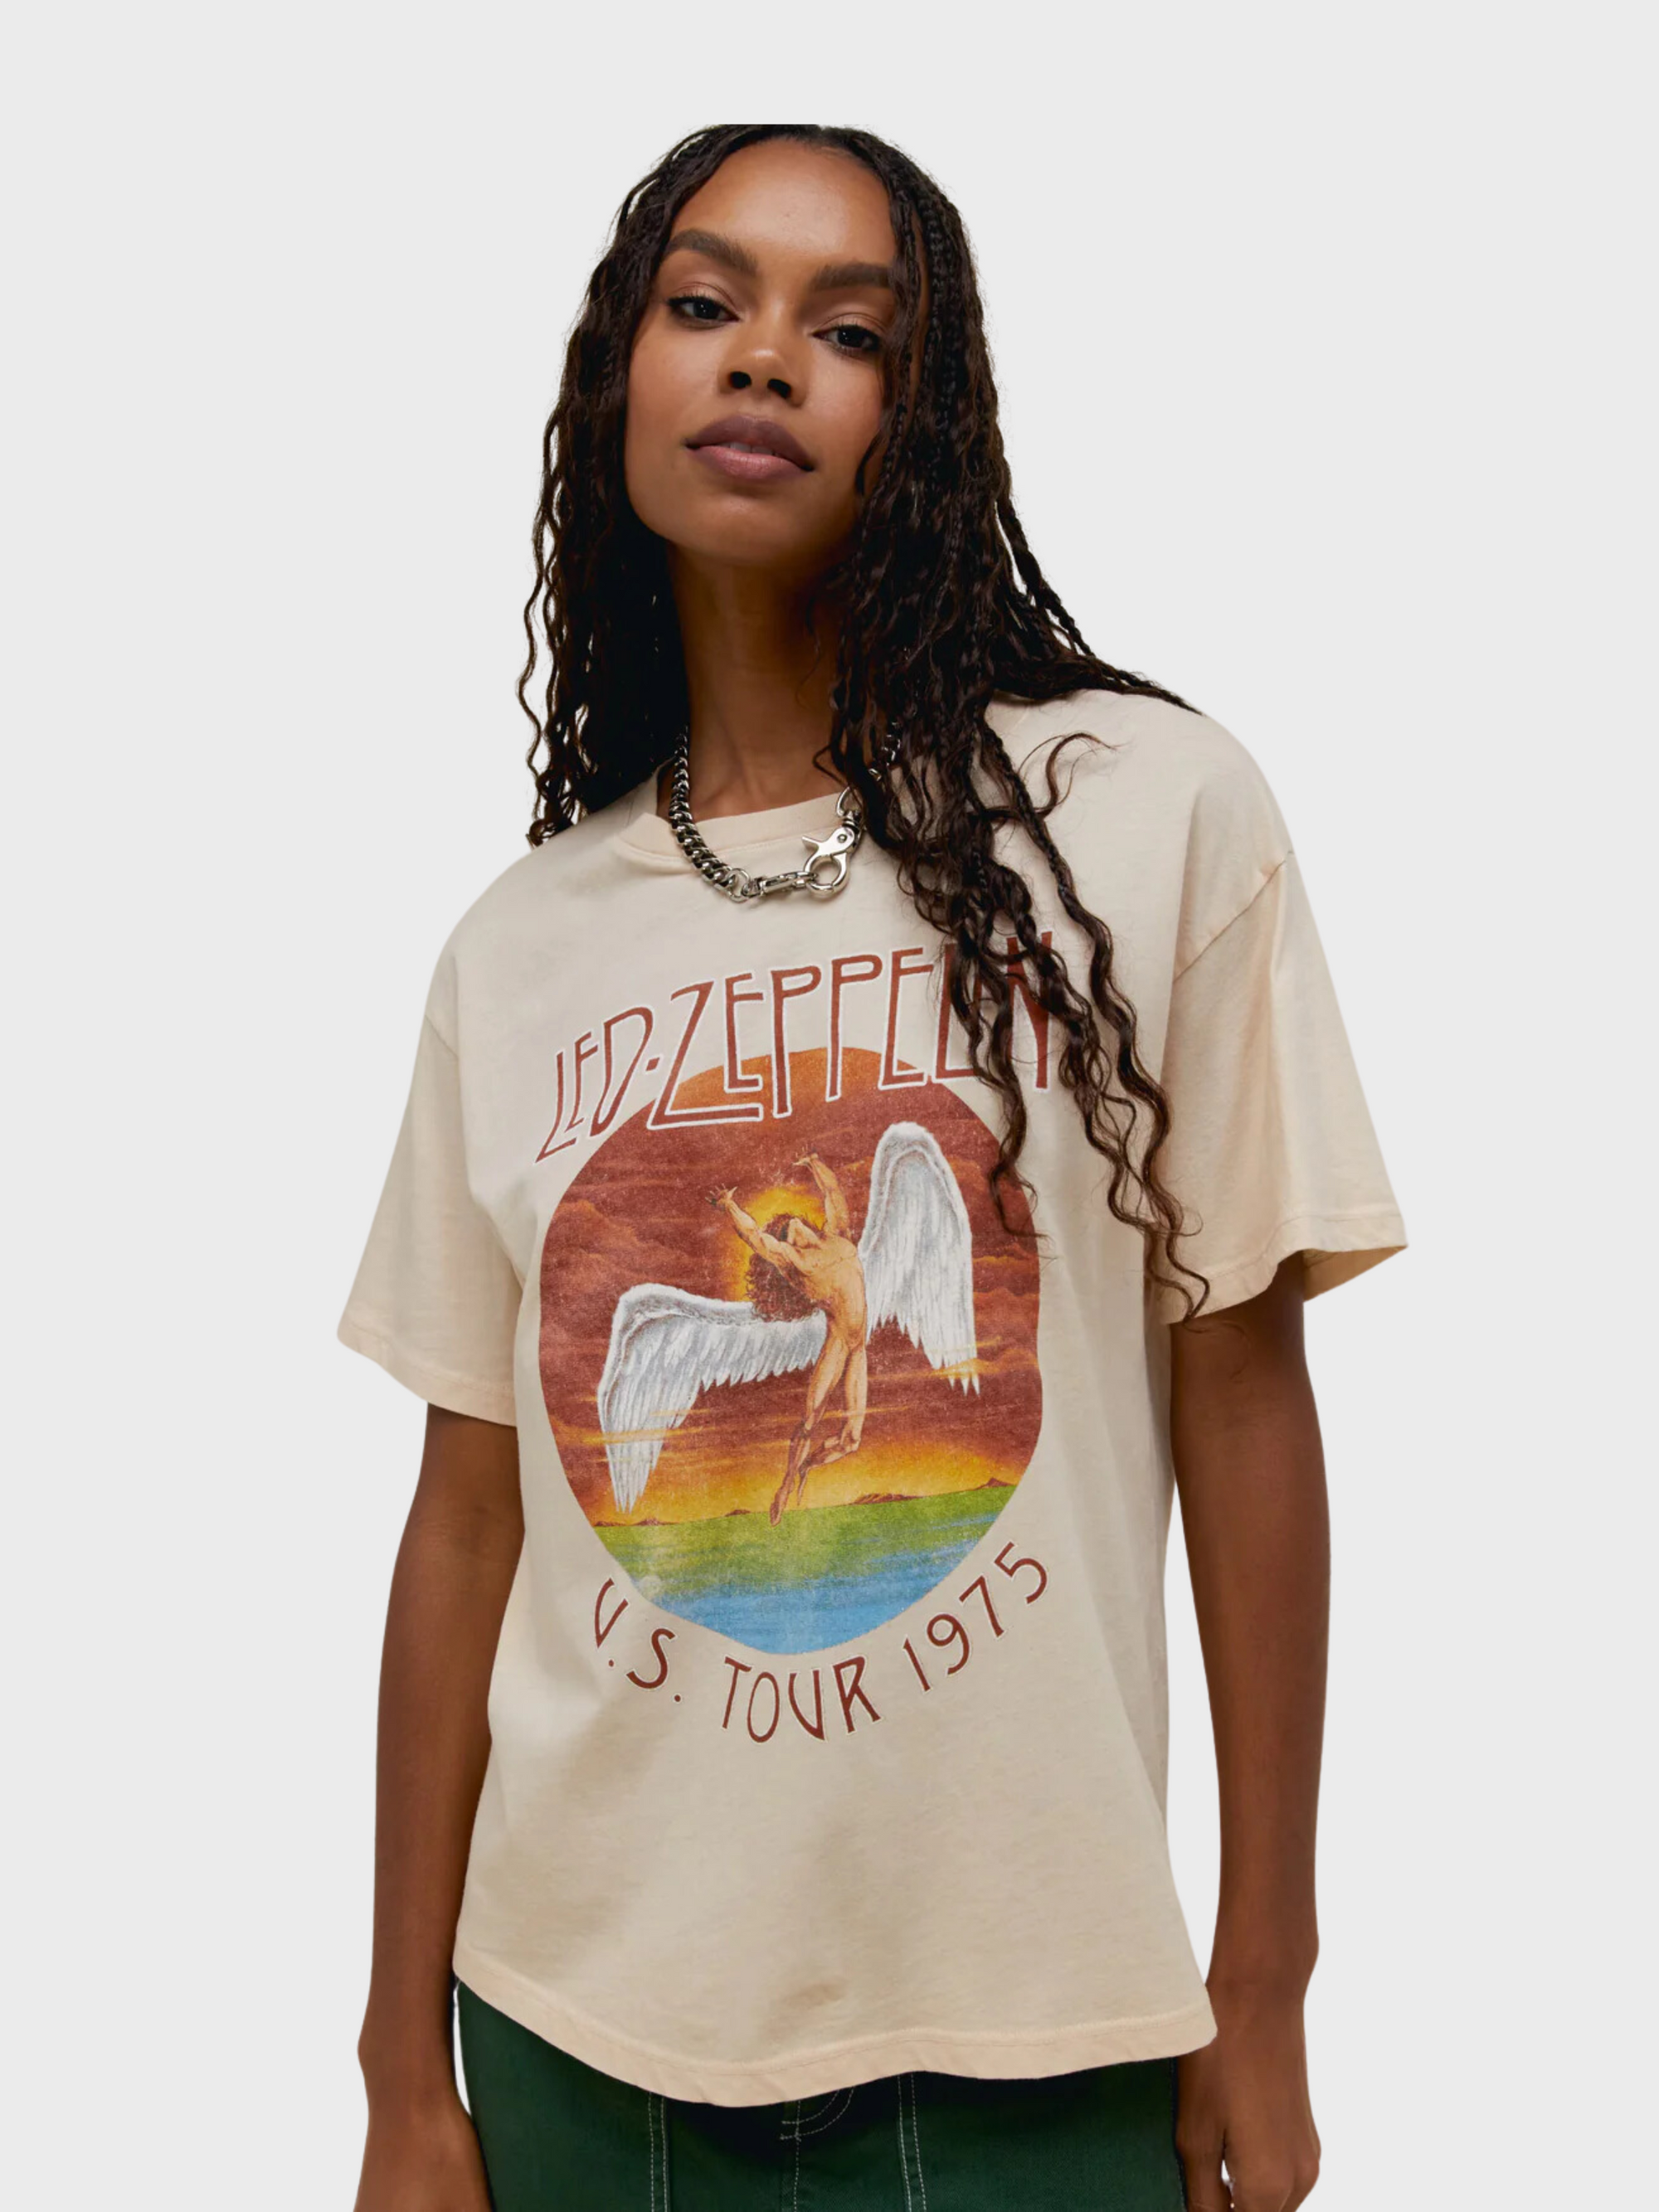 Daydreamer Led Zeppelin Tour 1975 Tee Sand-T-Shirts-XS-West of Woodward Boutique-Vancouver-Canada